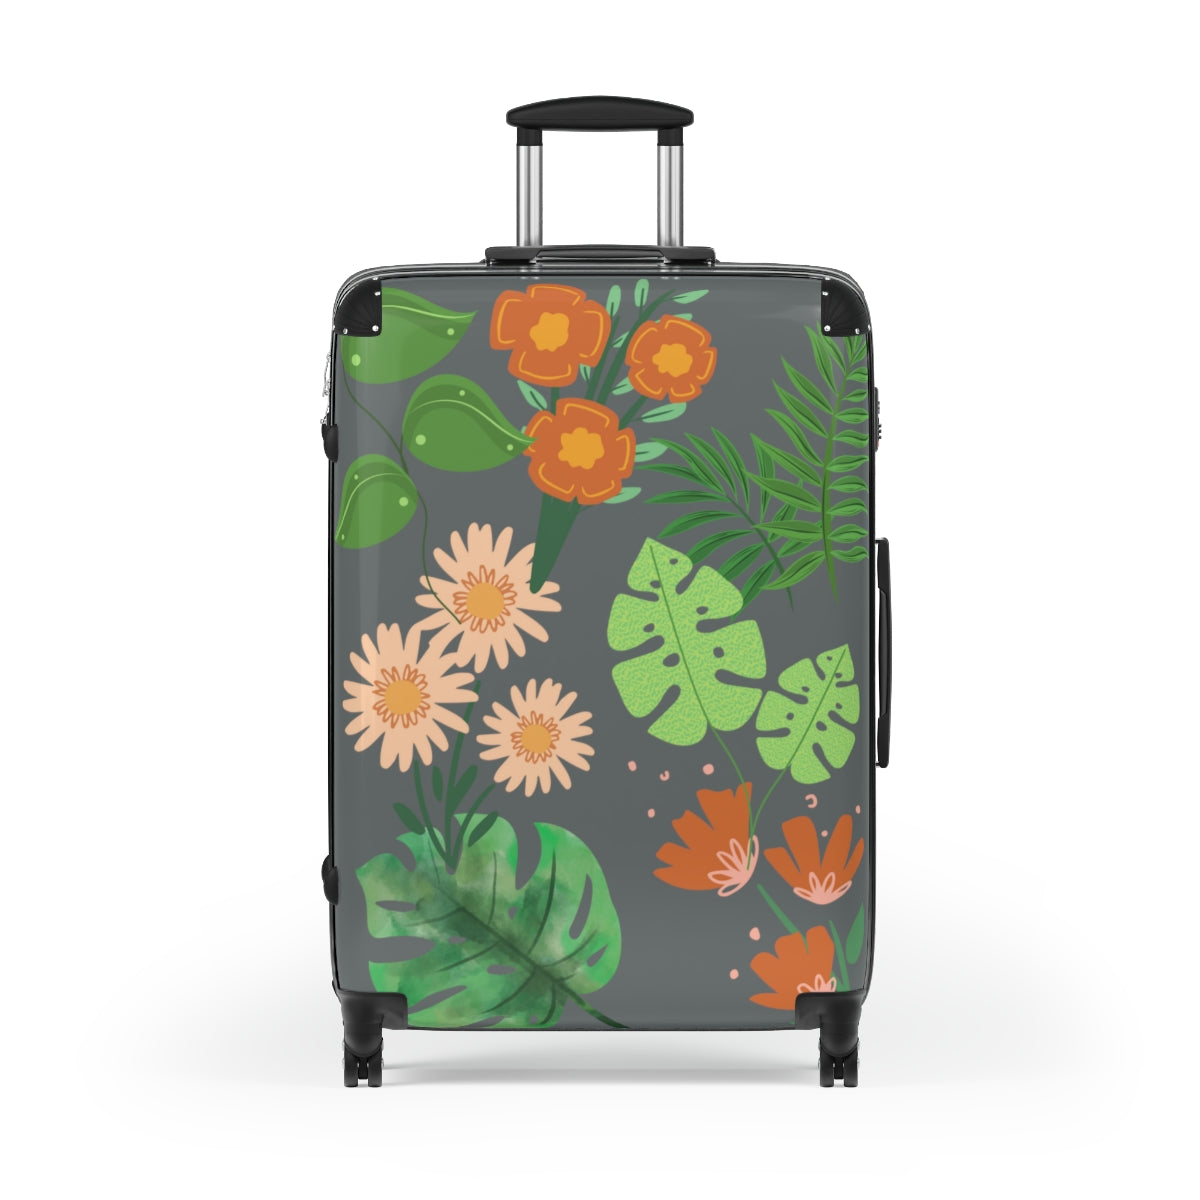 BEST CARRY-ON LUGGAGE SET, TROPICAL SUMMER DESIGN BY ARTZIRA, FLORAL CABIN SUITCASE FOR GIRLS, WOMEN, GIFT FOR BRIDESMAIDS, GIFT FOR MOTHERS, DOUBLE WHEELED SPINNER